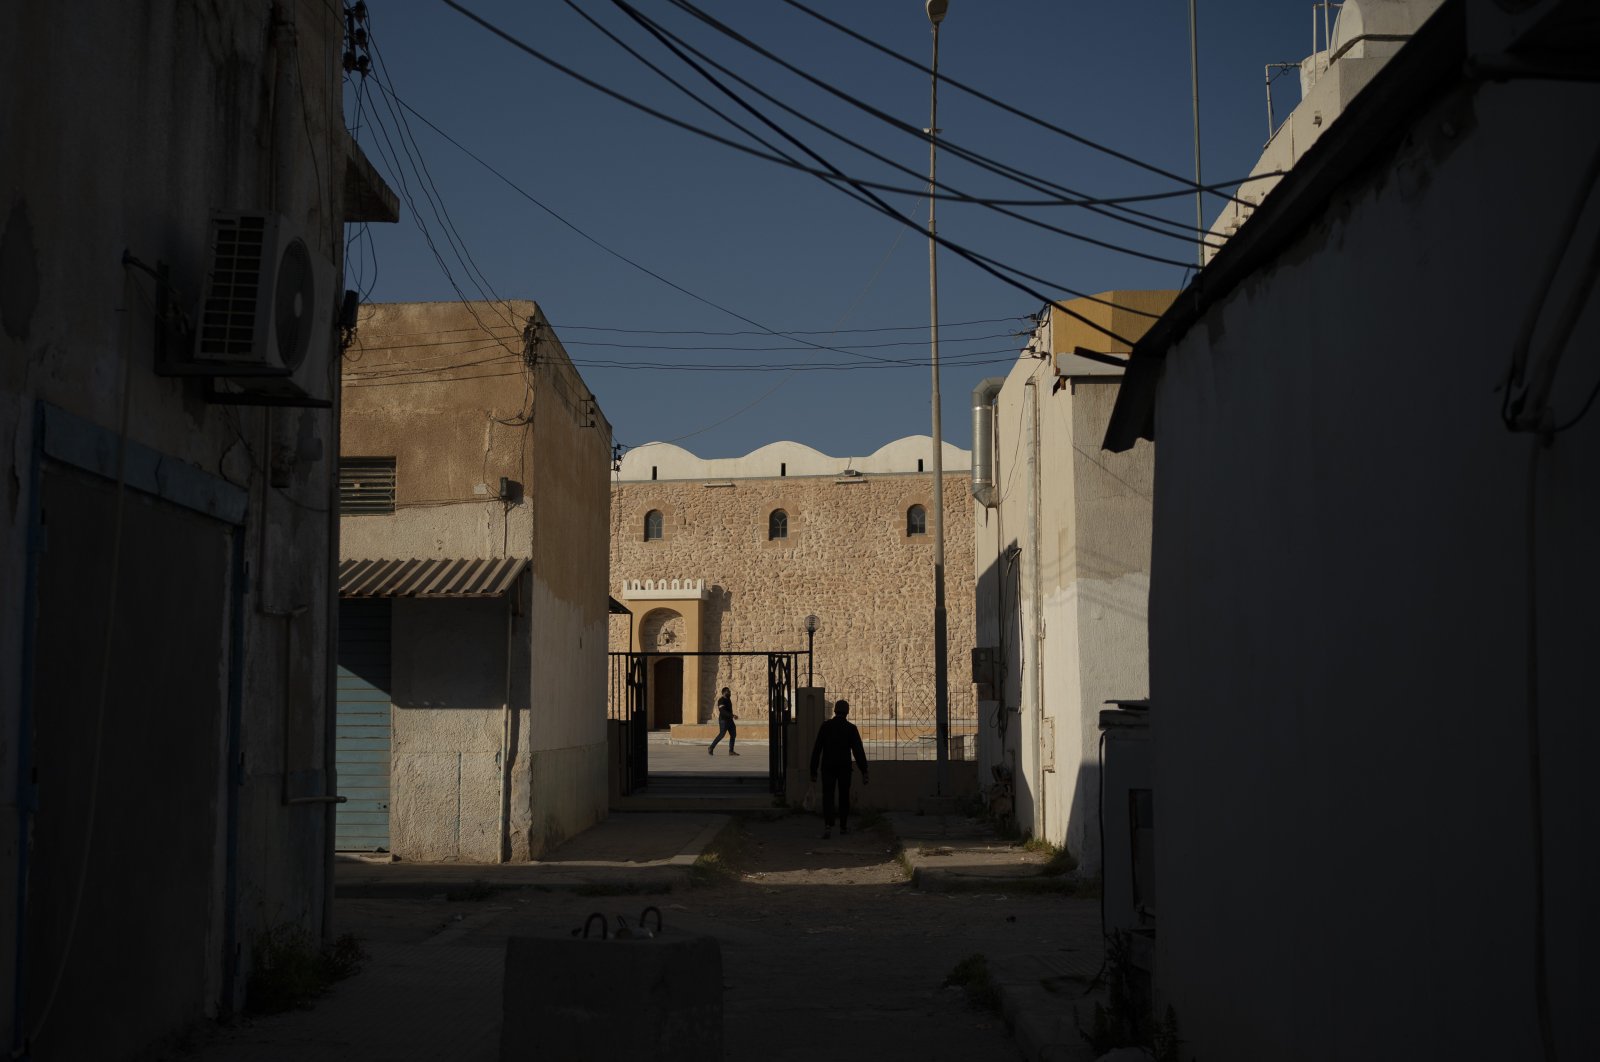 People walk outside a mosque in Tripoli, Libya, on Feb. 27, 2020. Eastern-based Haftar forces attacked Tripoli last spring to wrest it from control of the U.N.-backed government. (AP Photo)